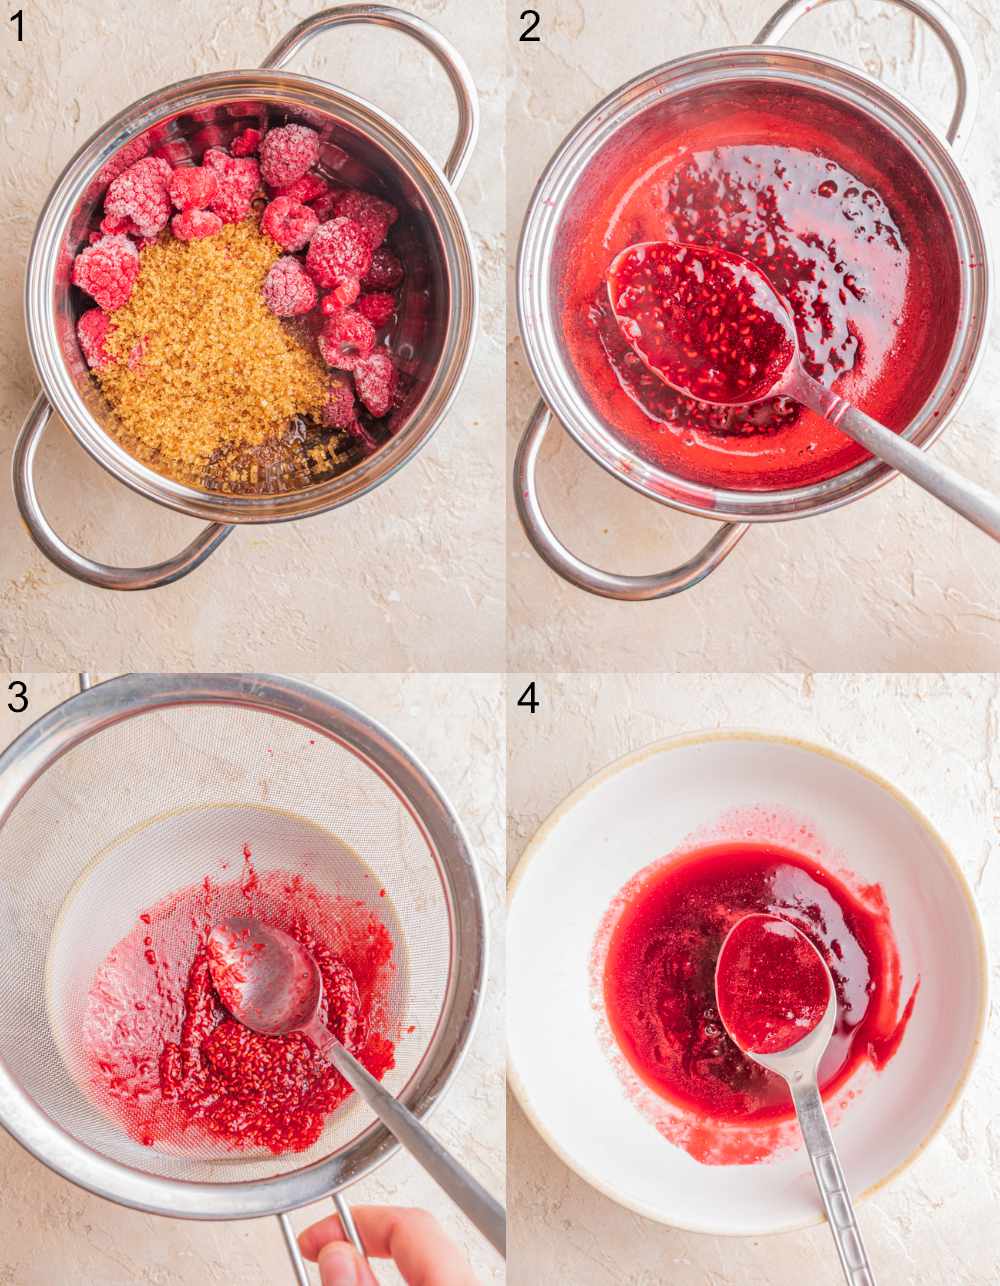 A collage of 4 photos showing how to prepare raspberry syrup.